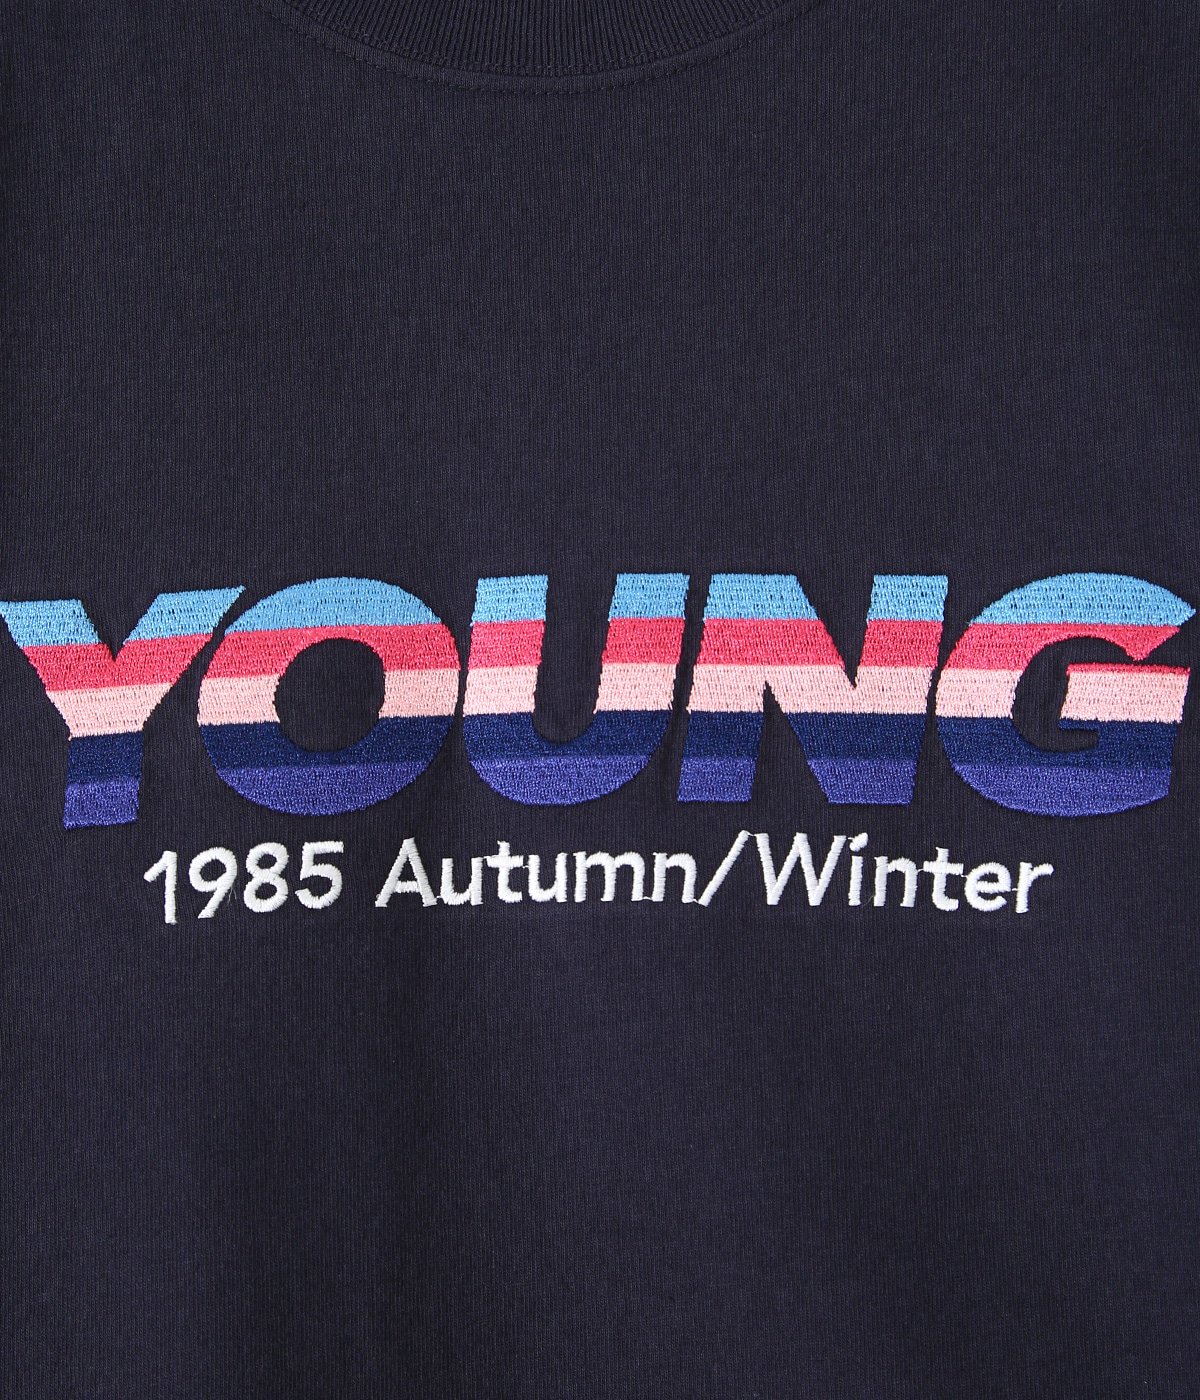 "YOUNG" Embroidery Tee